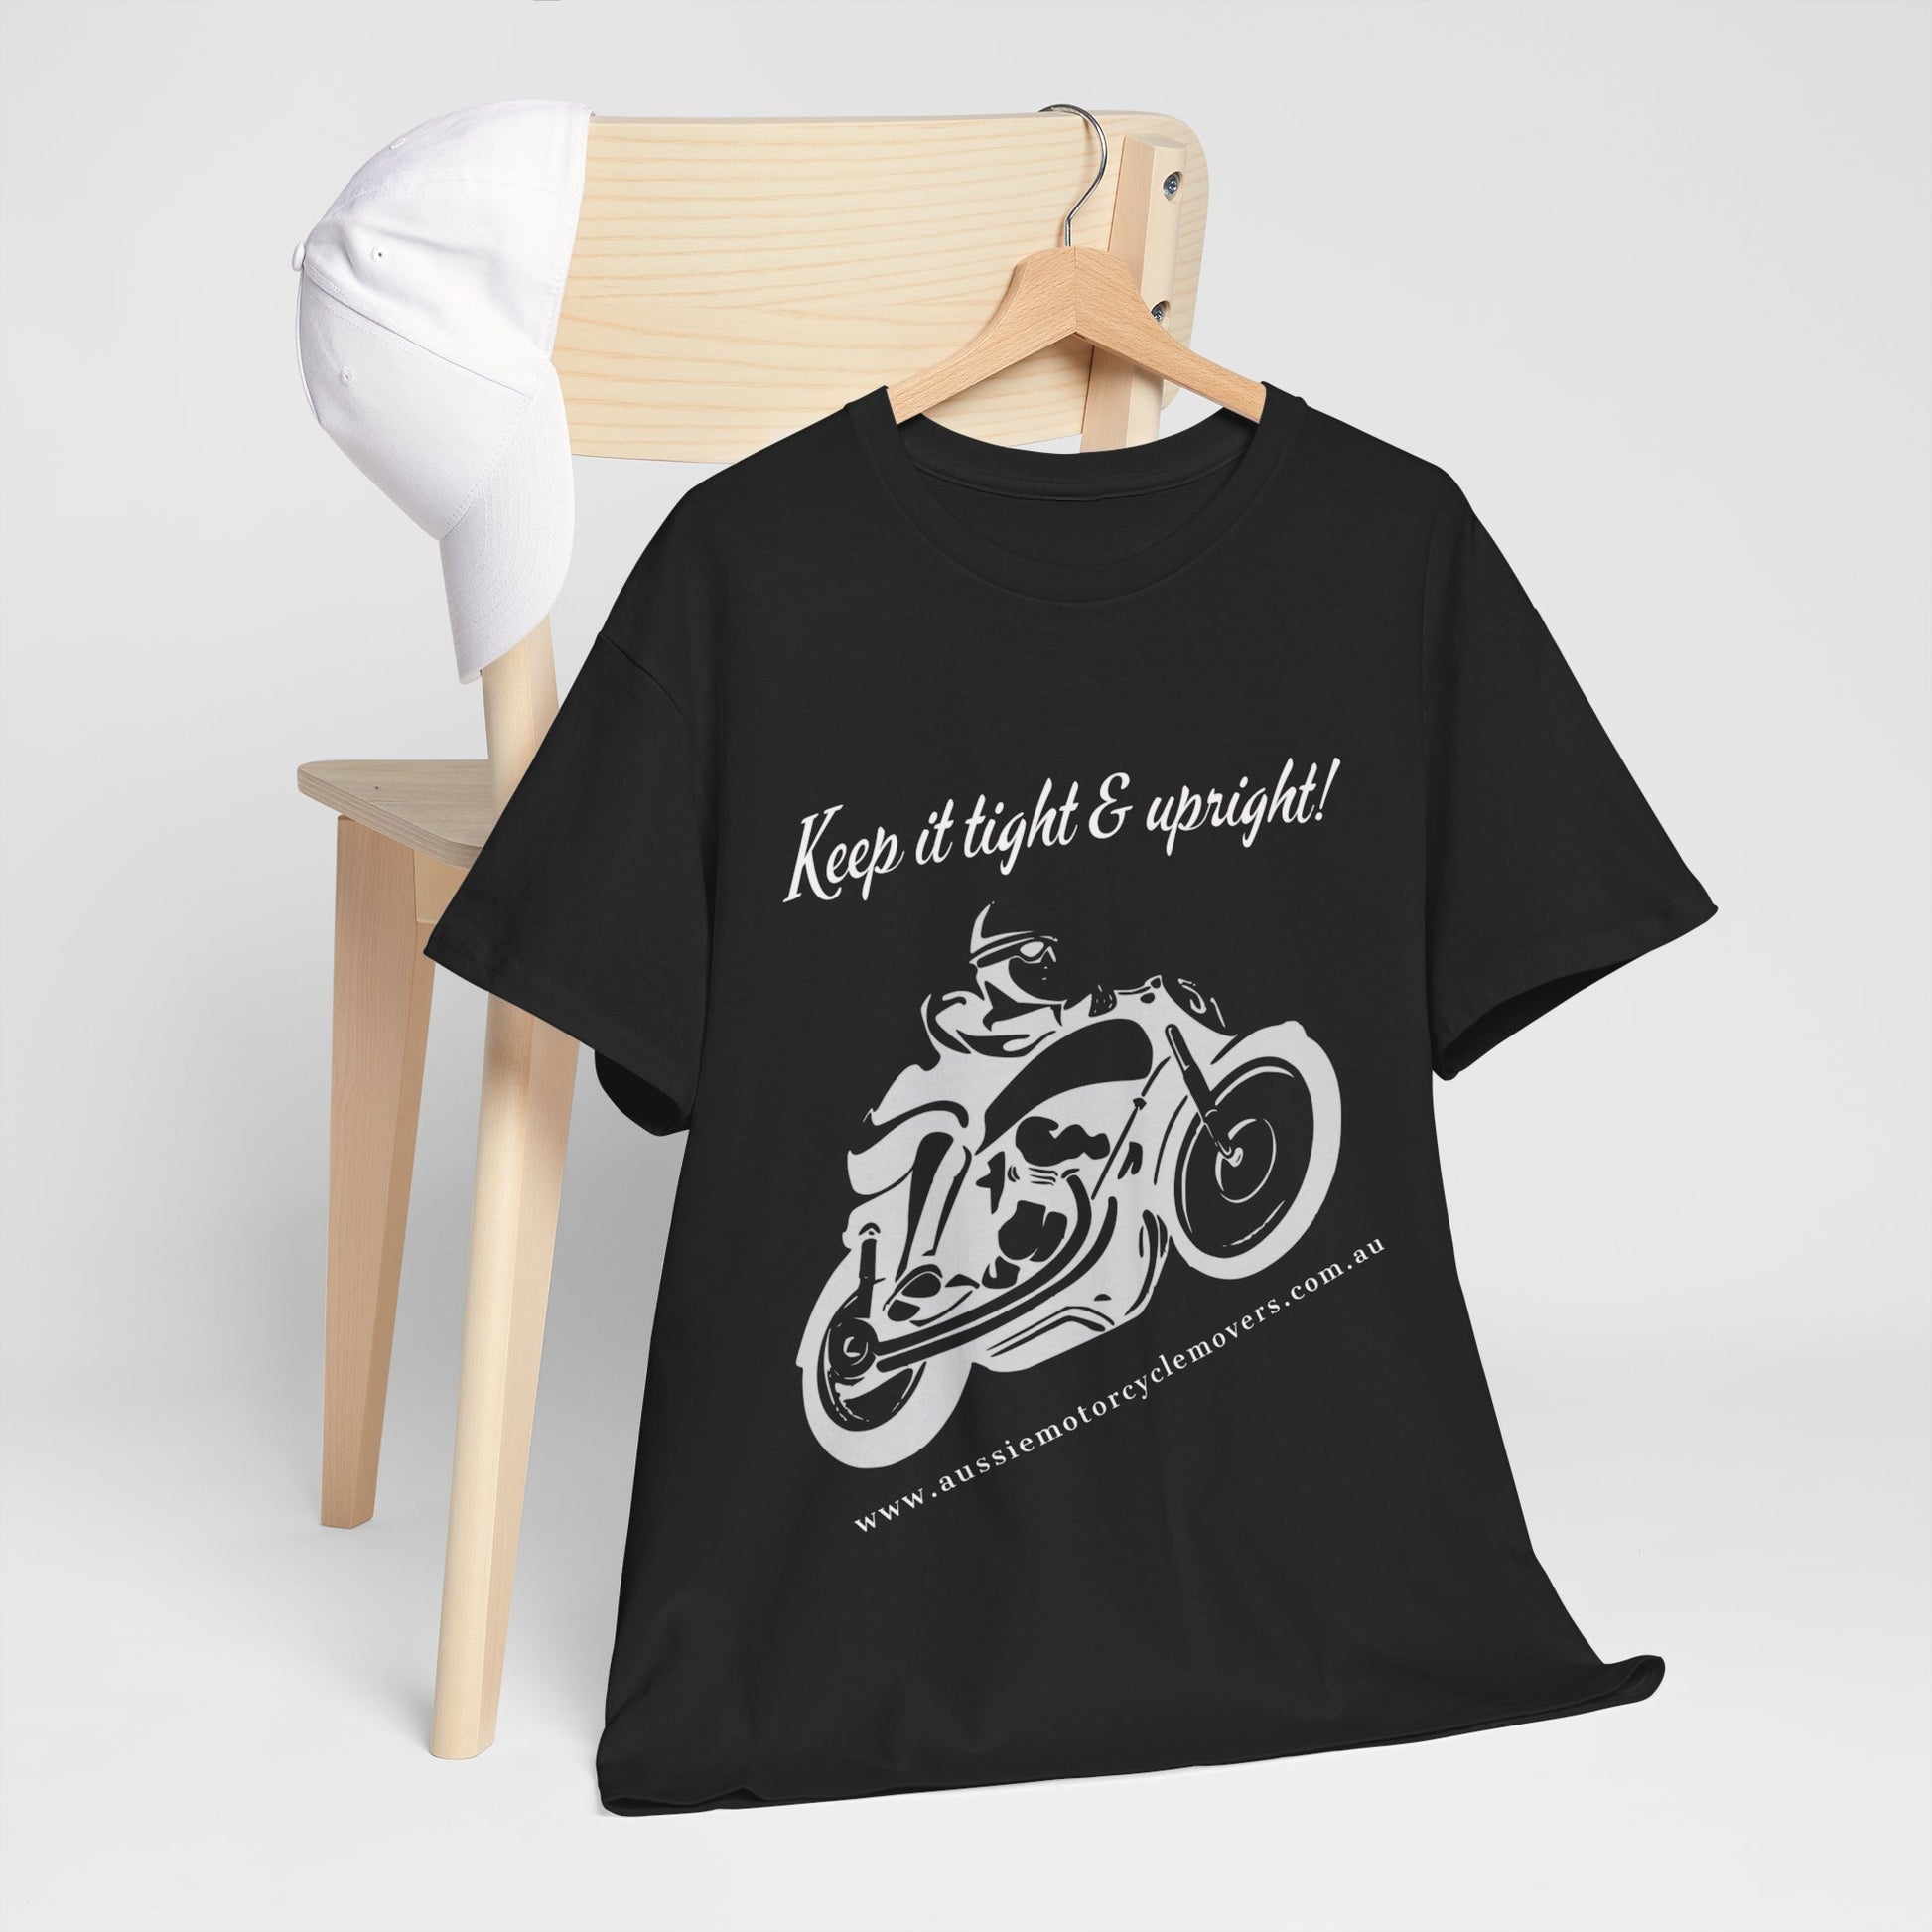 Aussie Motorcycle Movers Supporter T-Shirt | "Keep it Tight and Upright!" Mick Train Legendary Saying Tee T-Shirt Black S 